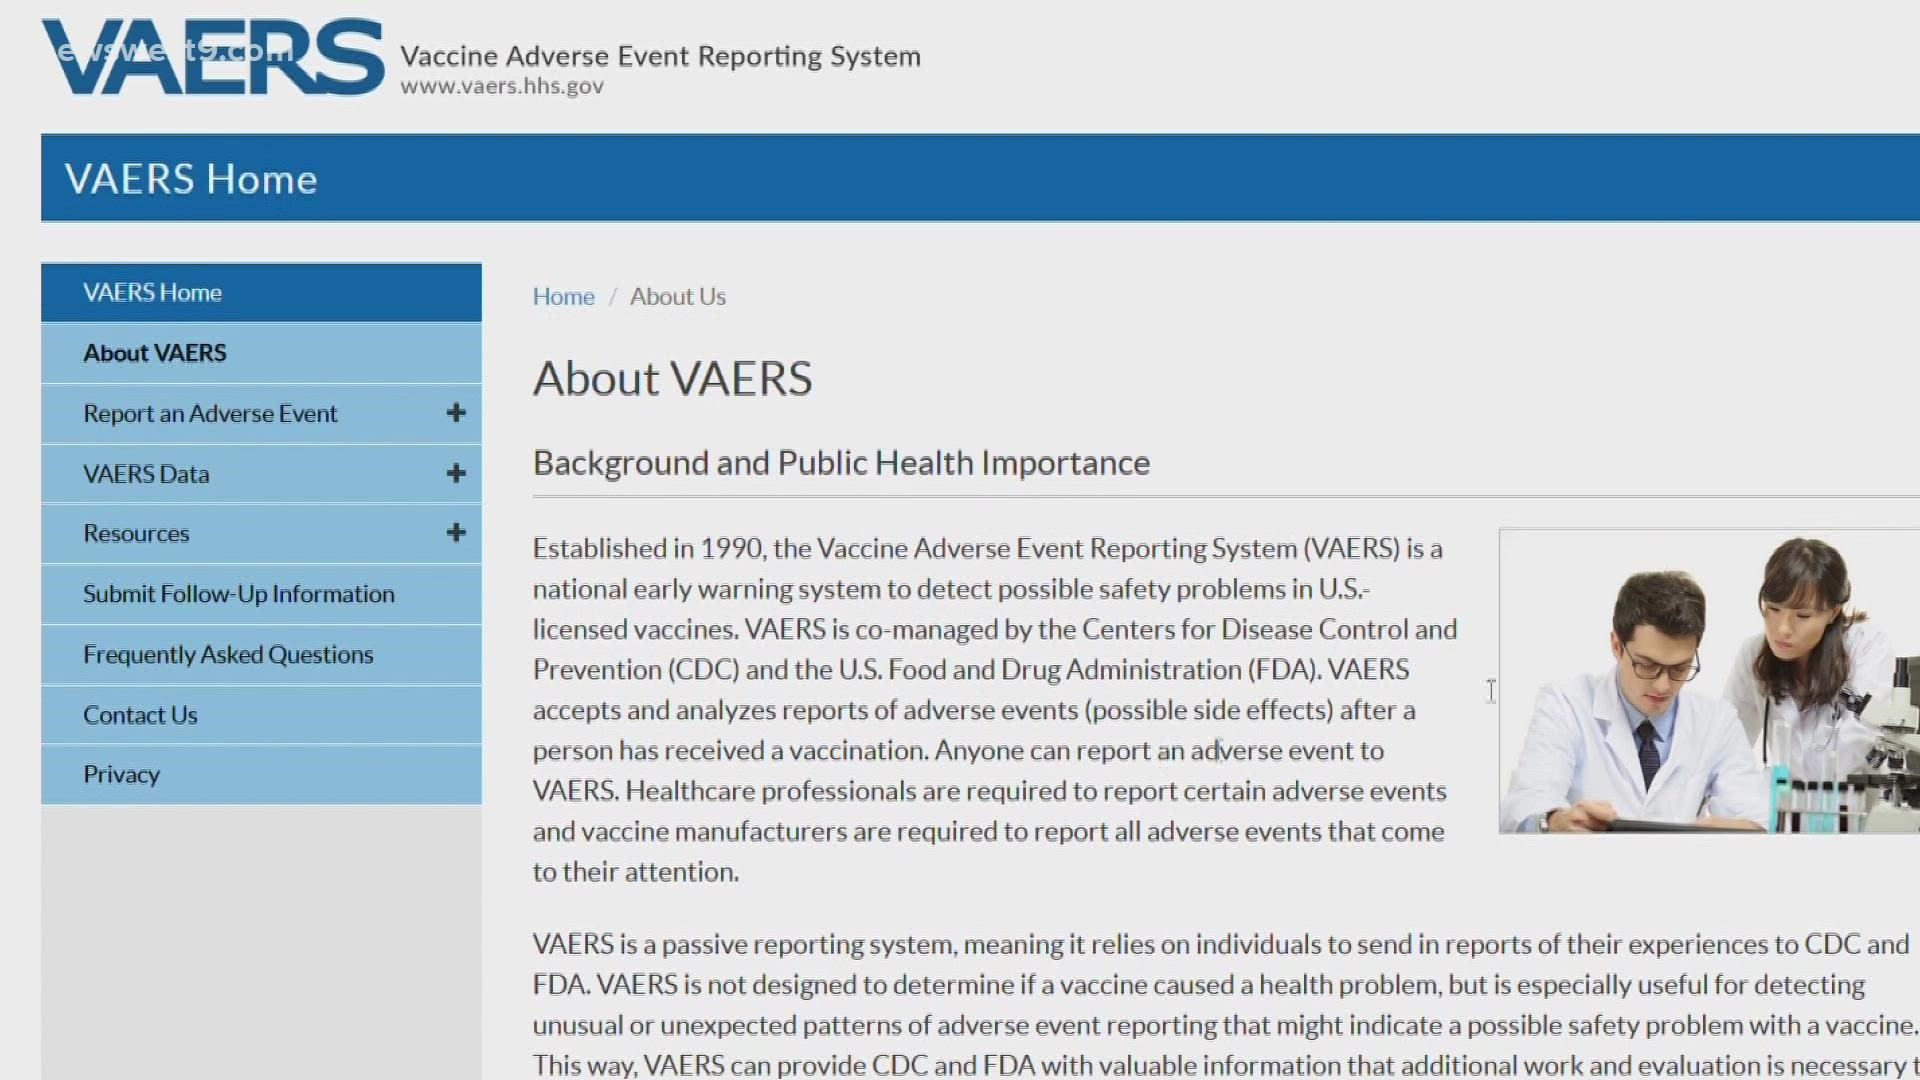 VAERS is an early warning system to detect possible safety problems in U.S. licensed vaccines. It's managed by the CDC and FDA.